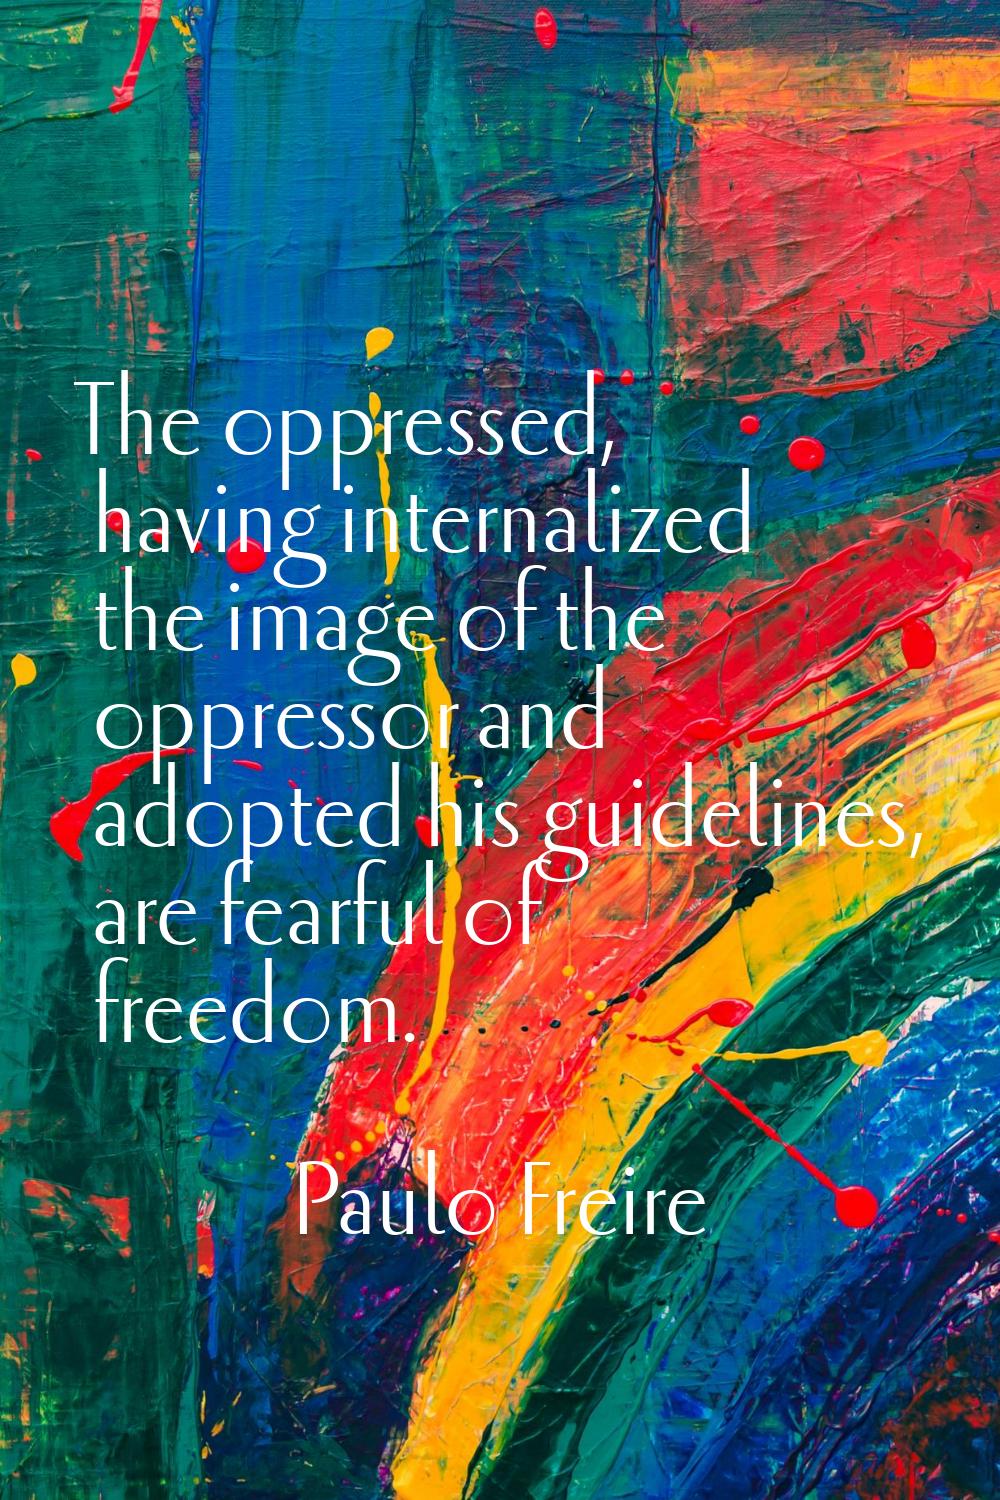 The oppressed, having internalized the image of the oppressor and adopted his guidelines, are fearf